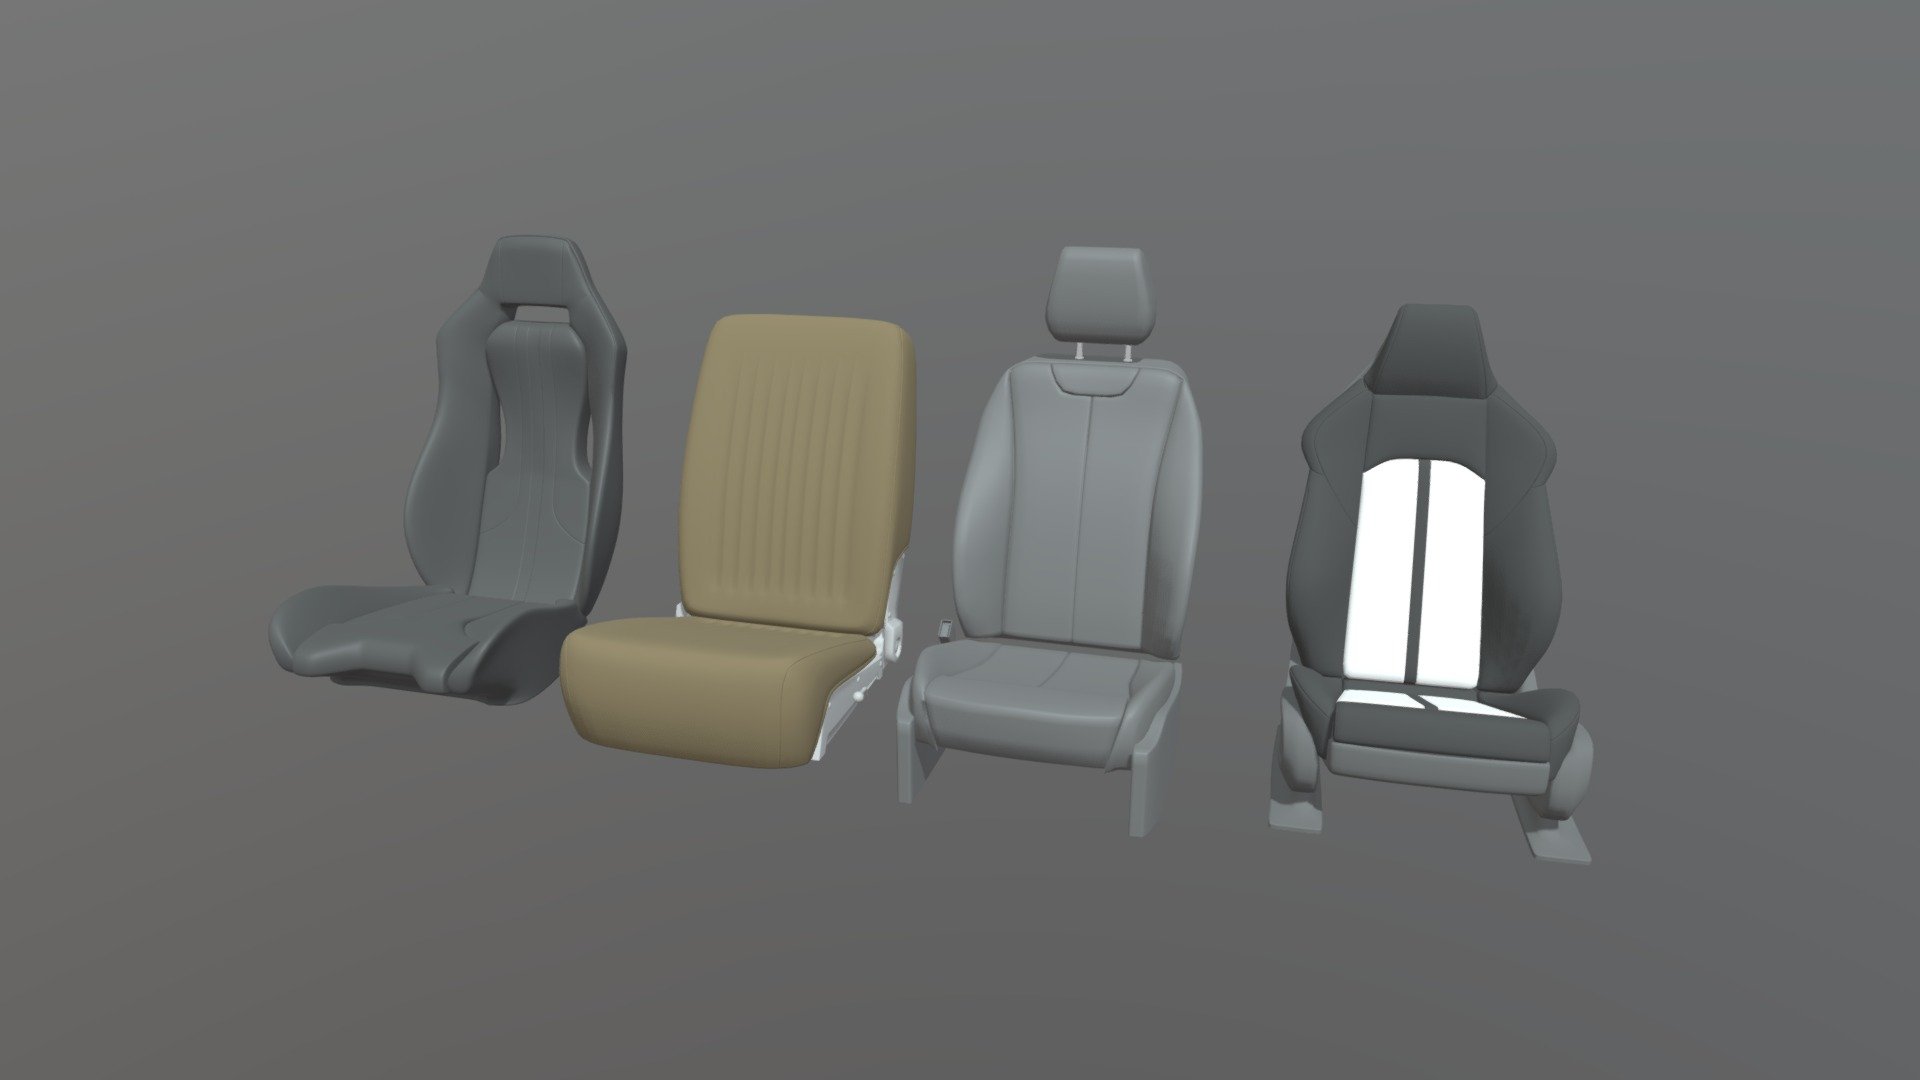 This model contains a Car Seat Pack based on a real stylized car seat from a real italian and german sport car which i modeled in Maya 2018 and is available for selling as a full car containing interior and just exterior. This model is perfect to create a new great scene with different car pieces or part of a car model.

This model is one of a great collection of car parts and a part of a full body italian car i published in my profile, which is available for buying.

If you need any kind of help contact me, i will help you with everything i can. If you like the model please give me some feedback, I would appreciate it.

Don't doubt on contacting me, i would be very happy to help. If you experience any kind of difficulties, be sure to contact me and i will help you. Sincerely Yours, ViperJr3D - Car Seat Pack - Buy Royalty Free 3D model by ViperJr3D 3d model